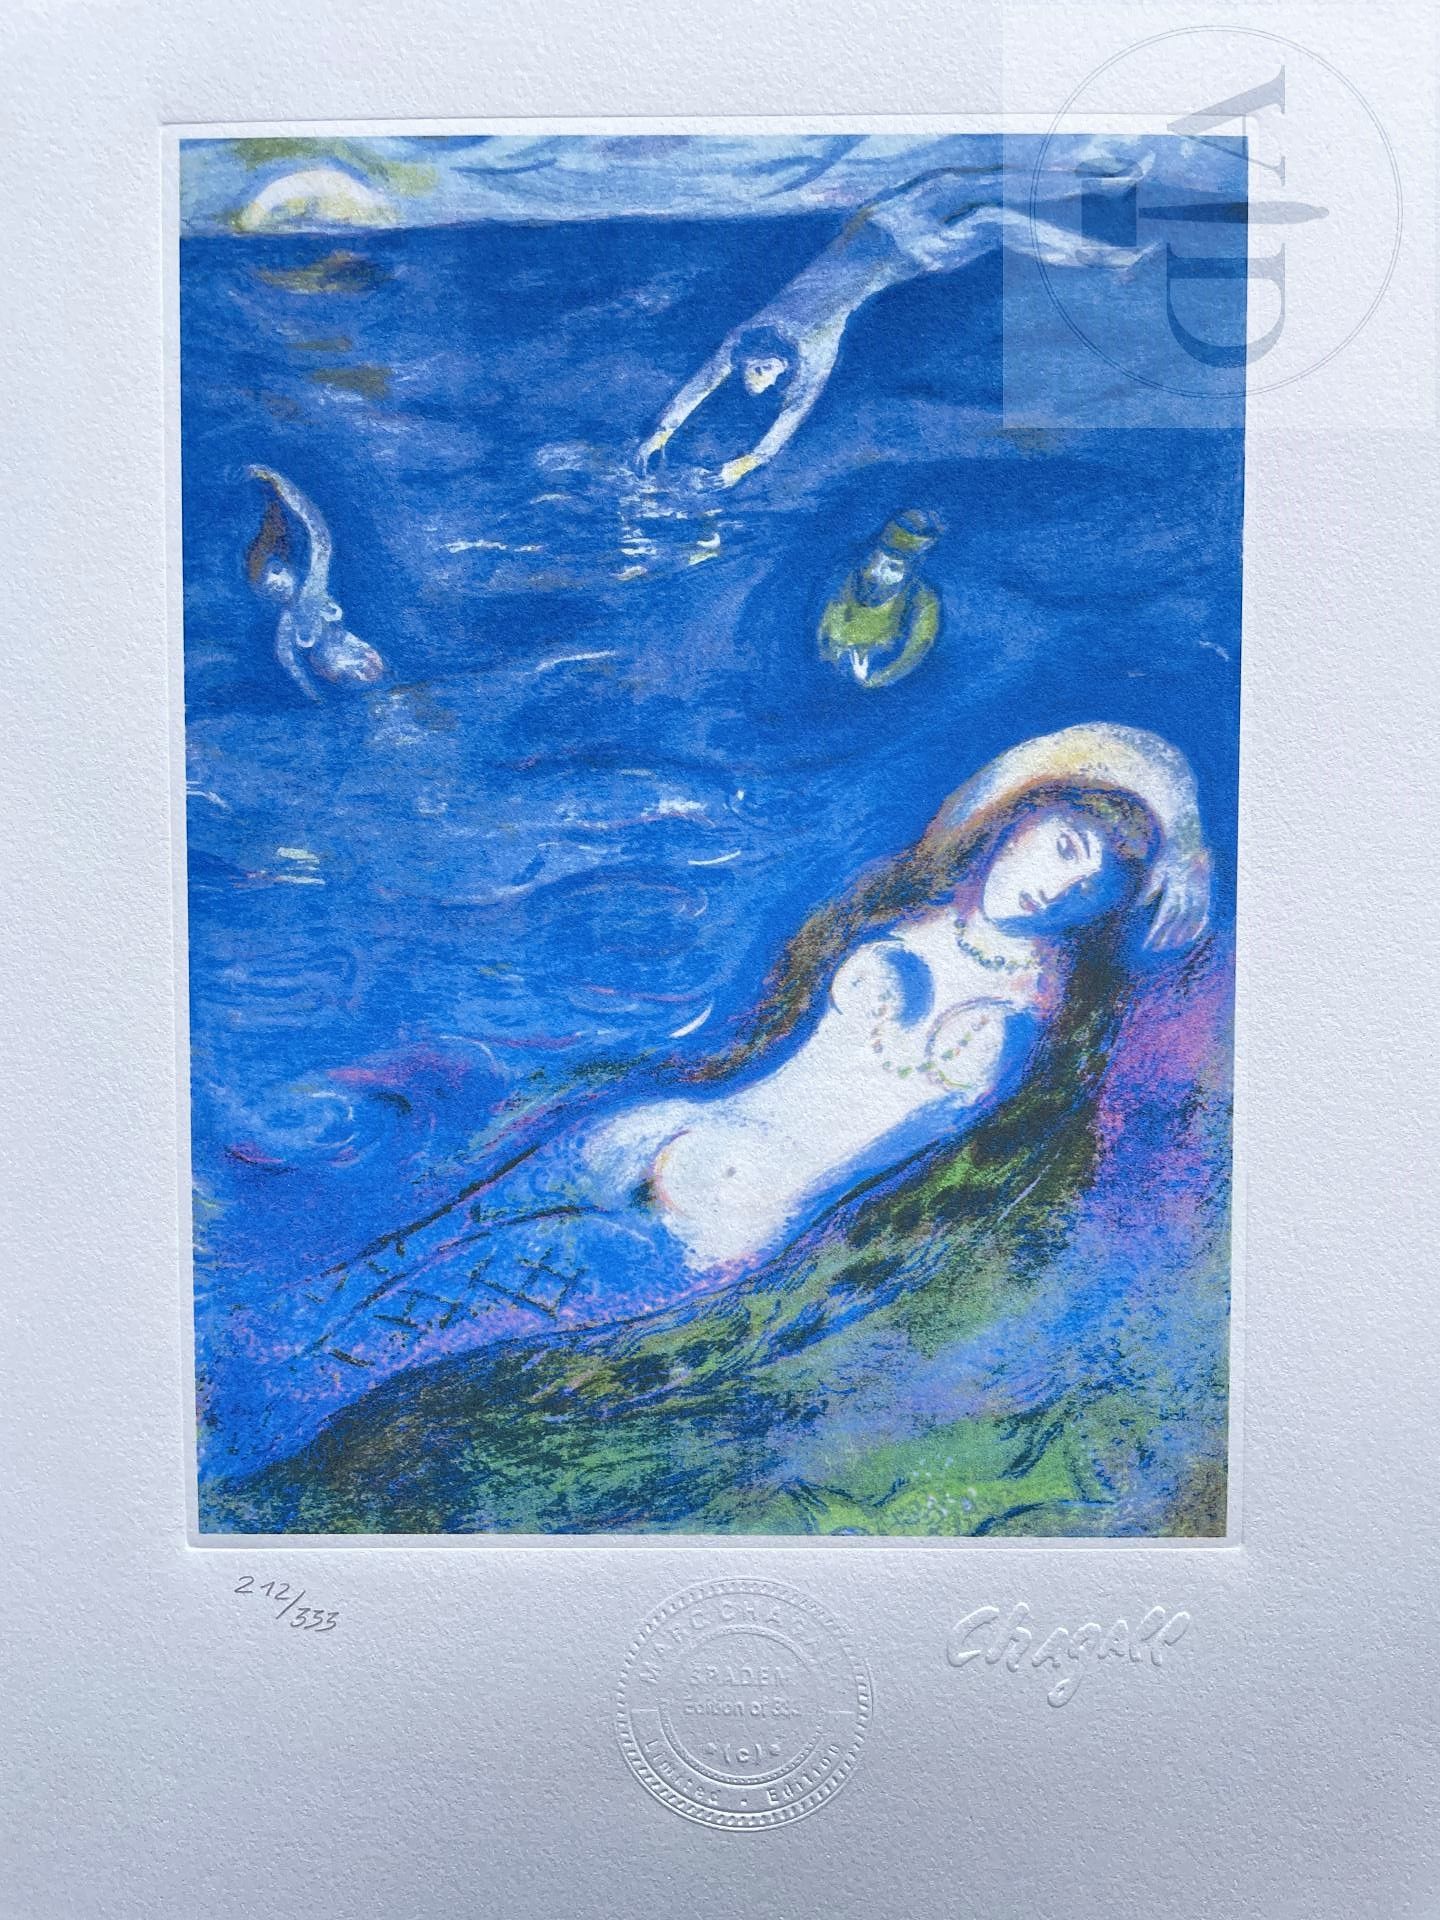 Null Chagall/Lithograph published in 1985 and n°/333 ex. 33 X 38 cm